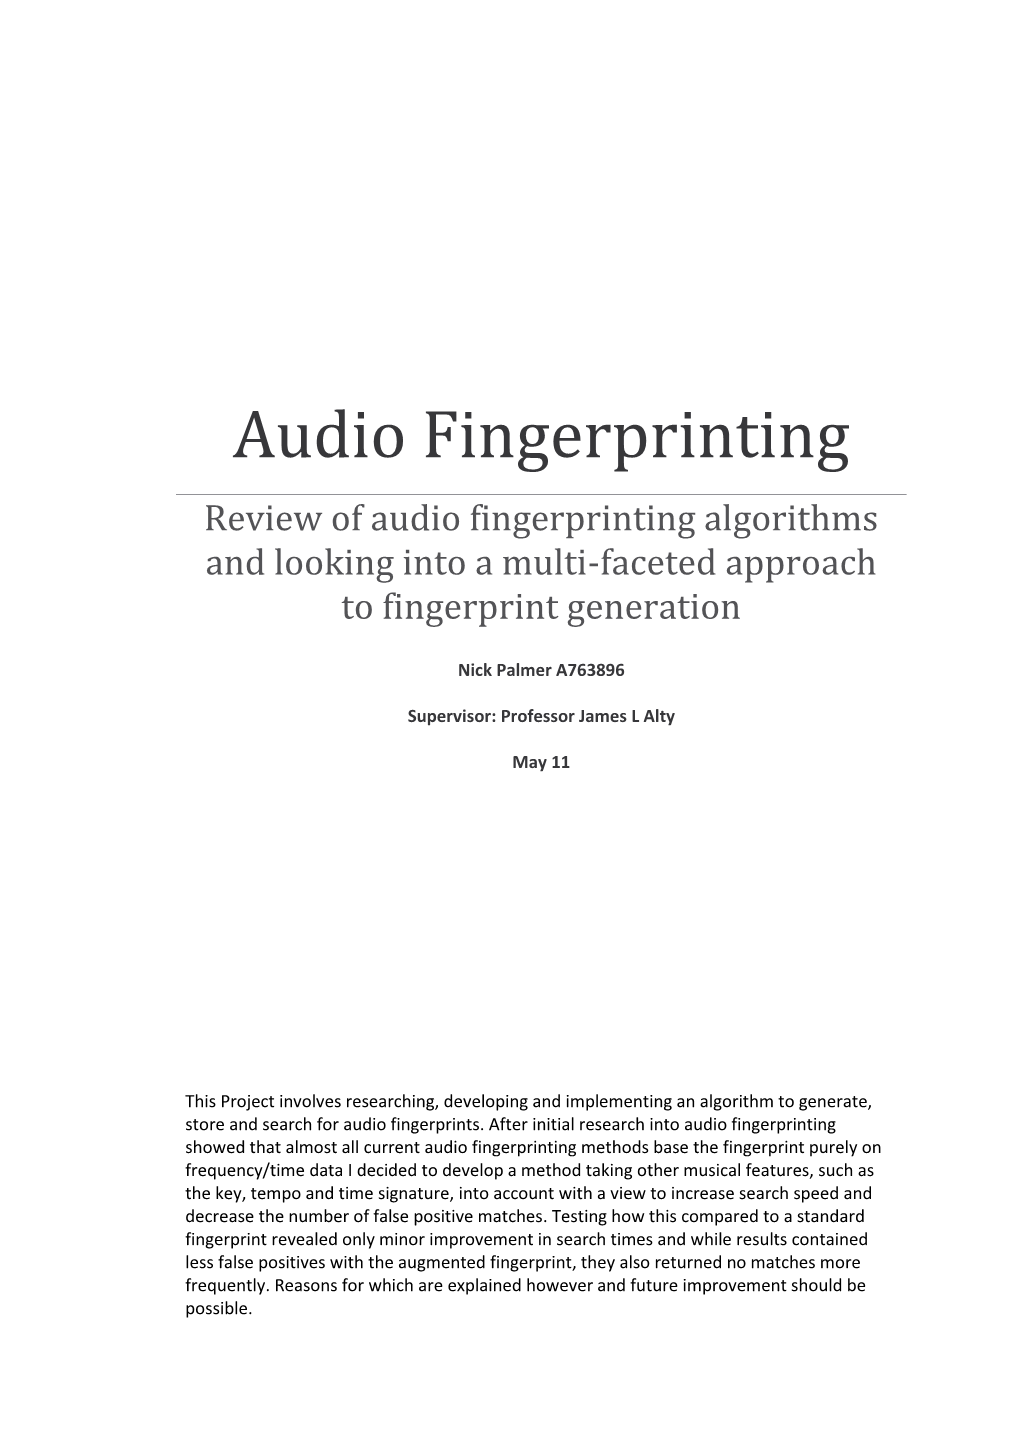 Audio Fingerprinting Review of Audio Fingerprinting Algorithms and Looking Into a Multi-Faceted Approach to Fingerprint Generation